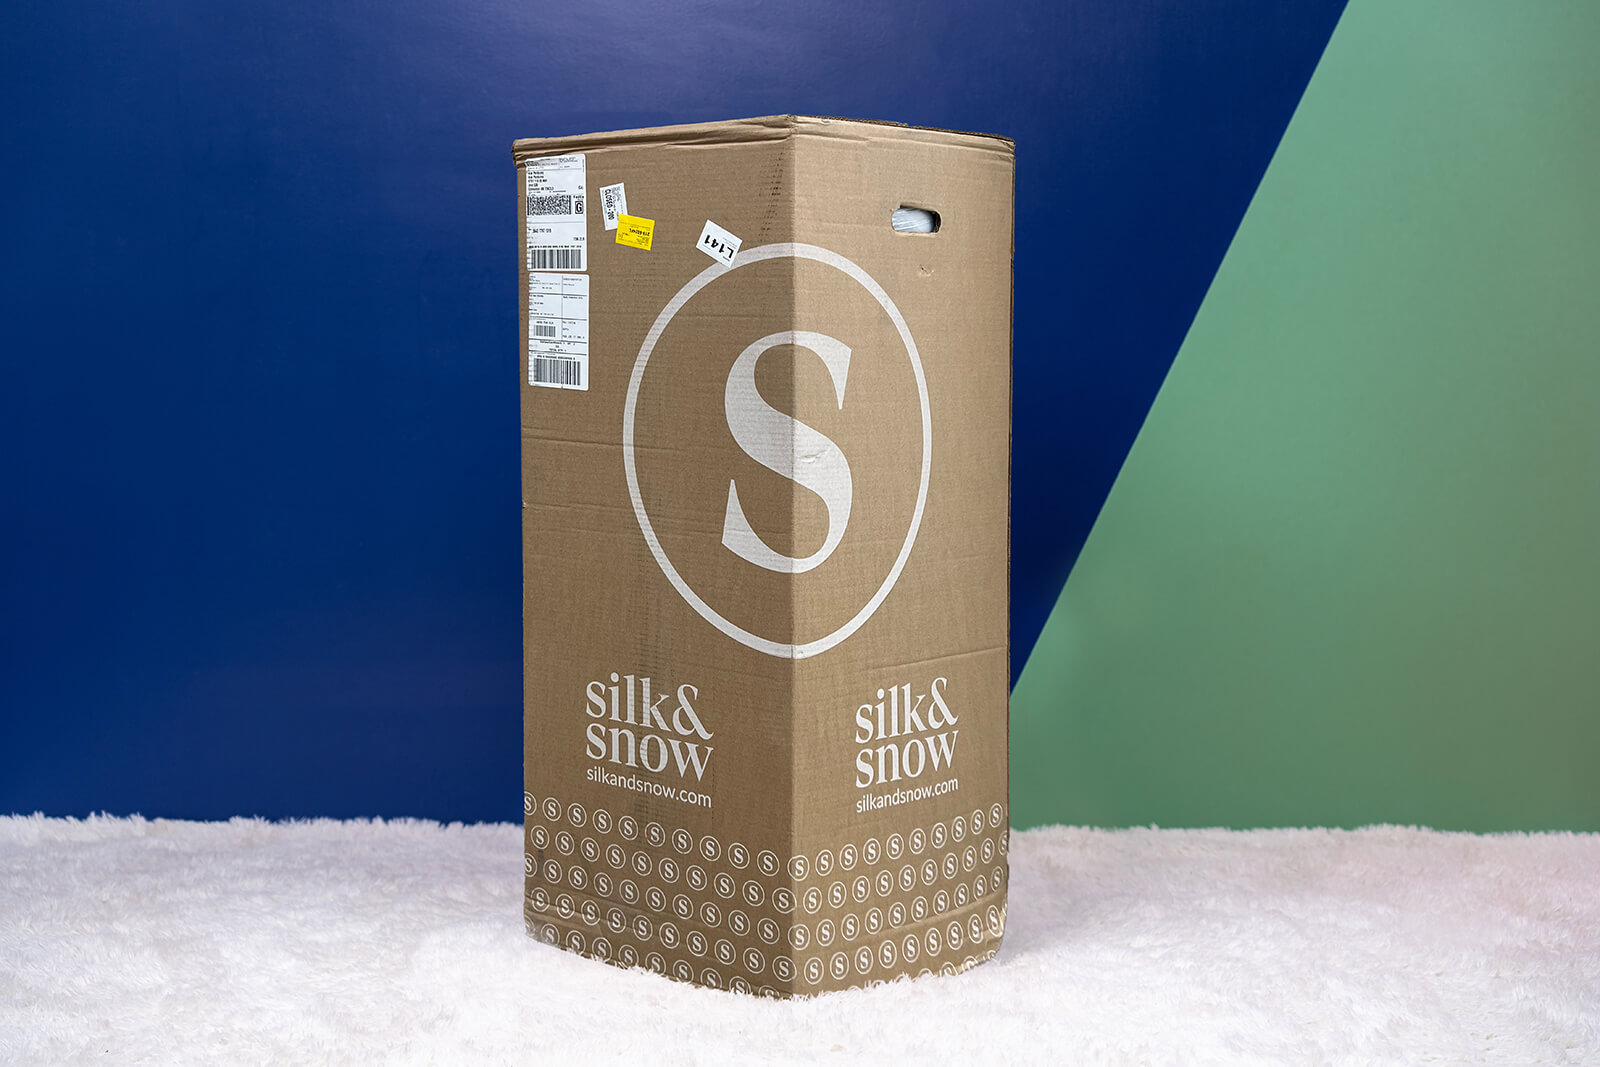 Photo of the Silk & Snow Mattress box on the floor in a bedroom taken from a front angle.